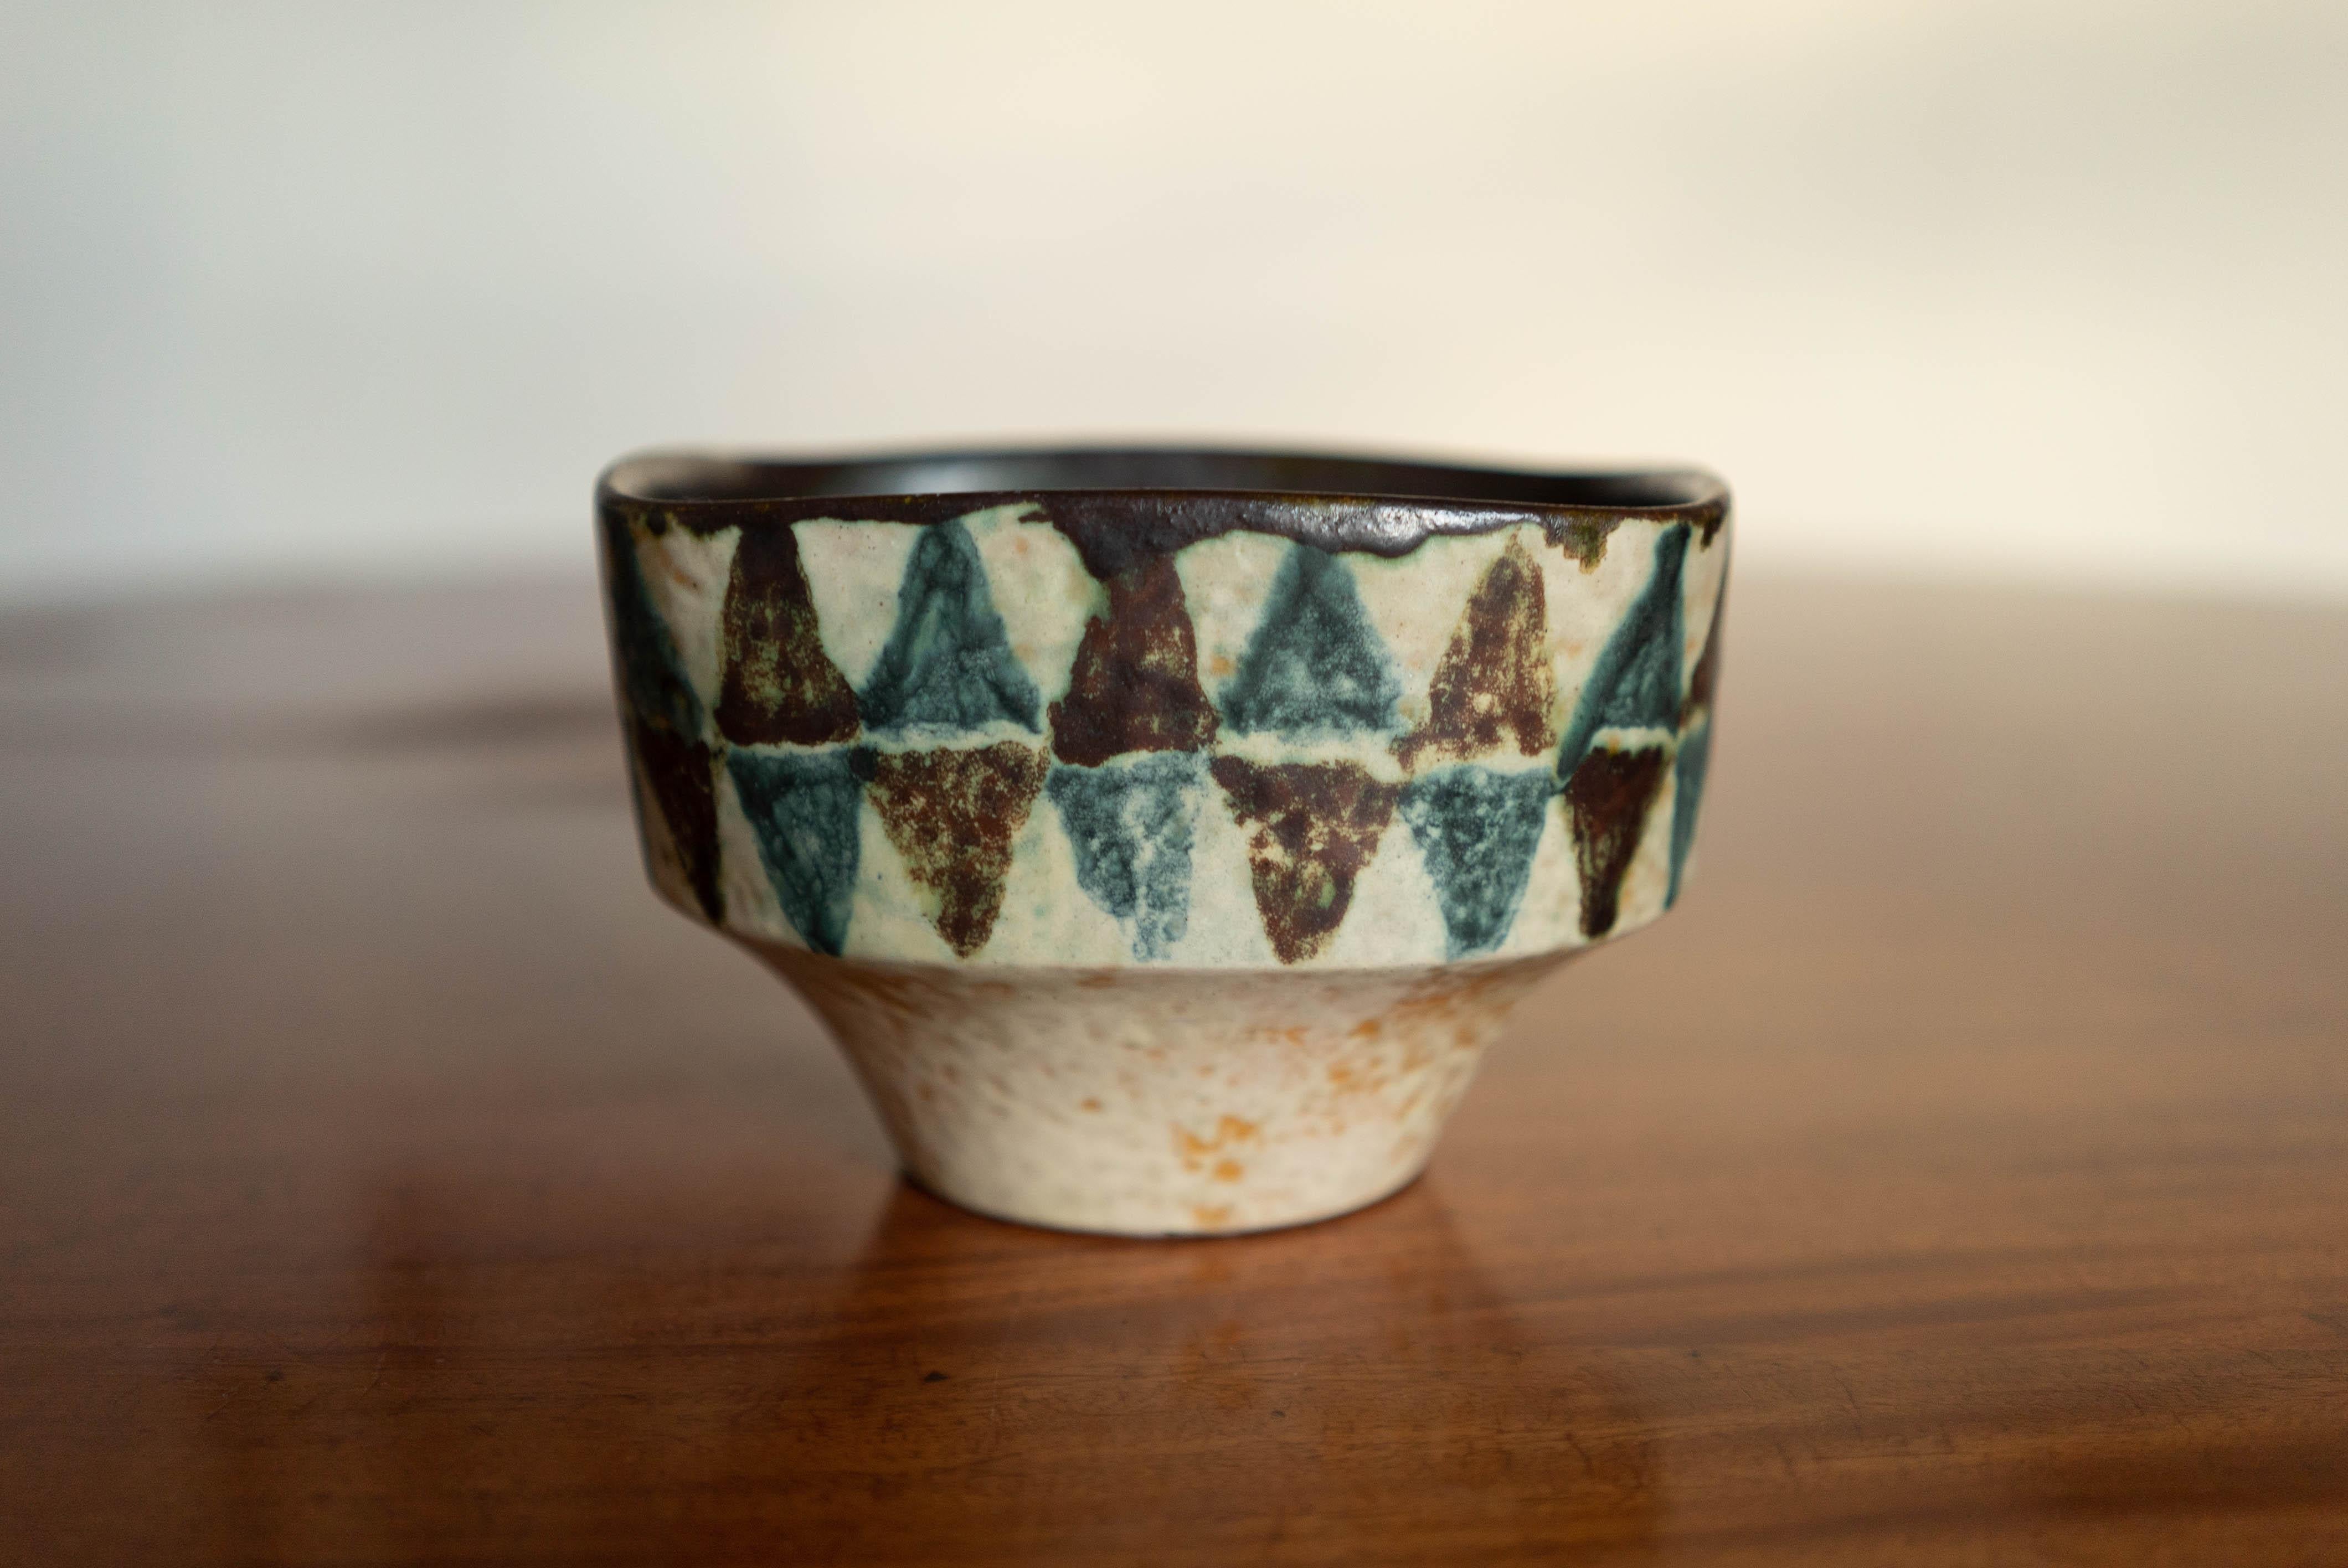 Danish Mid-Century Modern beautiful glazed Stoneware small bowl made by Danish ceramist Preben Herluf Gottschalk Olsen.
Produced in his workshop in the 1940s. Beautiful glazing in various tones of color. It's really a rare peace. 